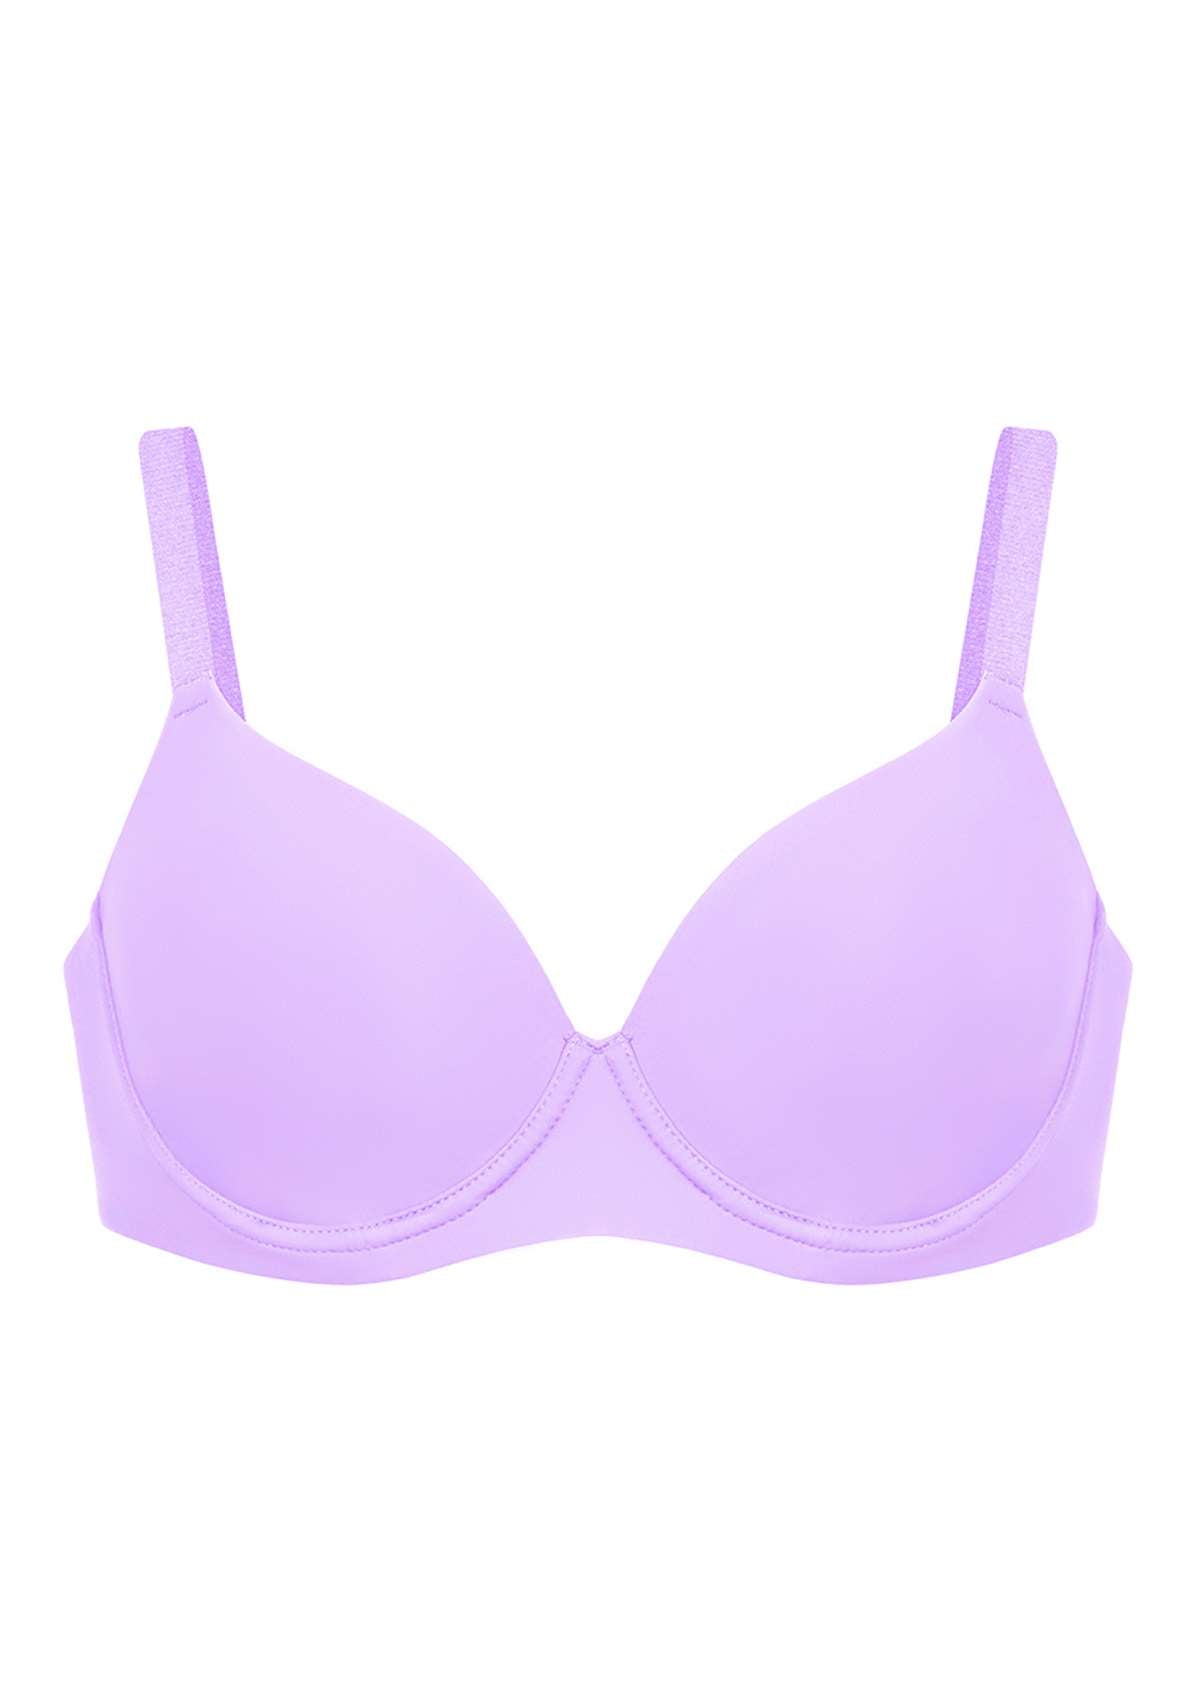 HSIA Gemma Smooth Lightly Padded T-shirt Bra For Heavy Breasts - Pink / 34 / C